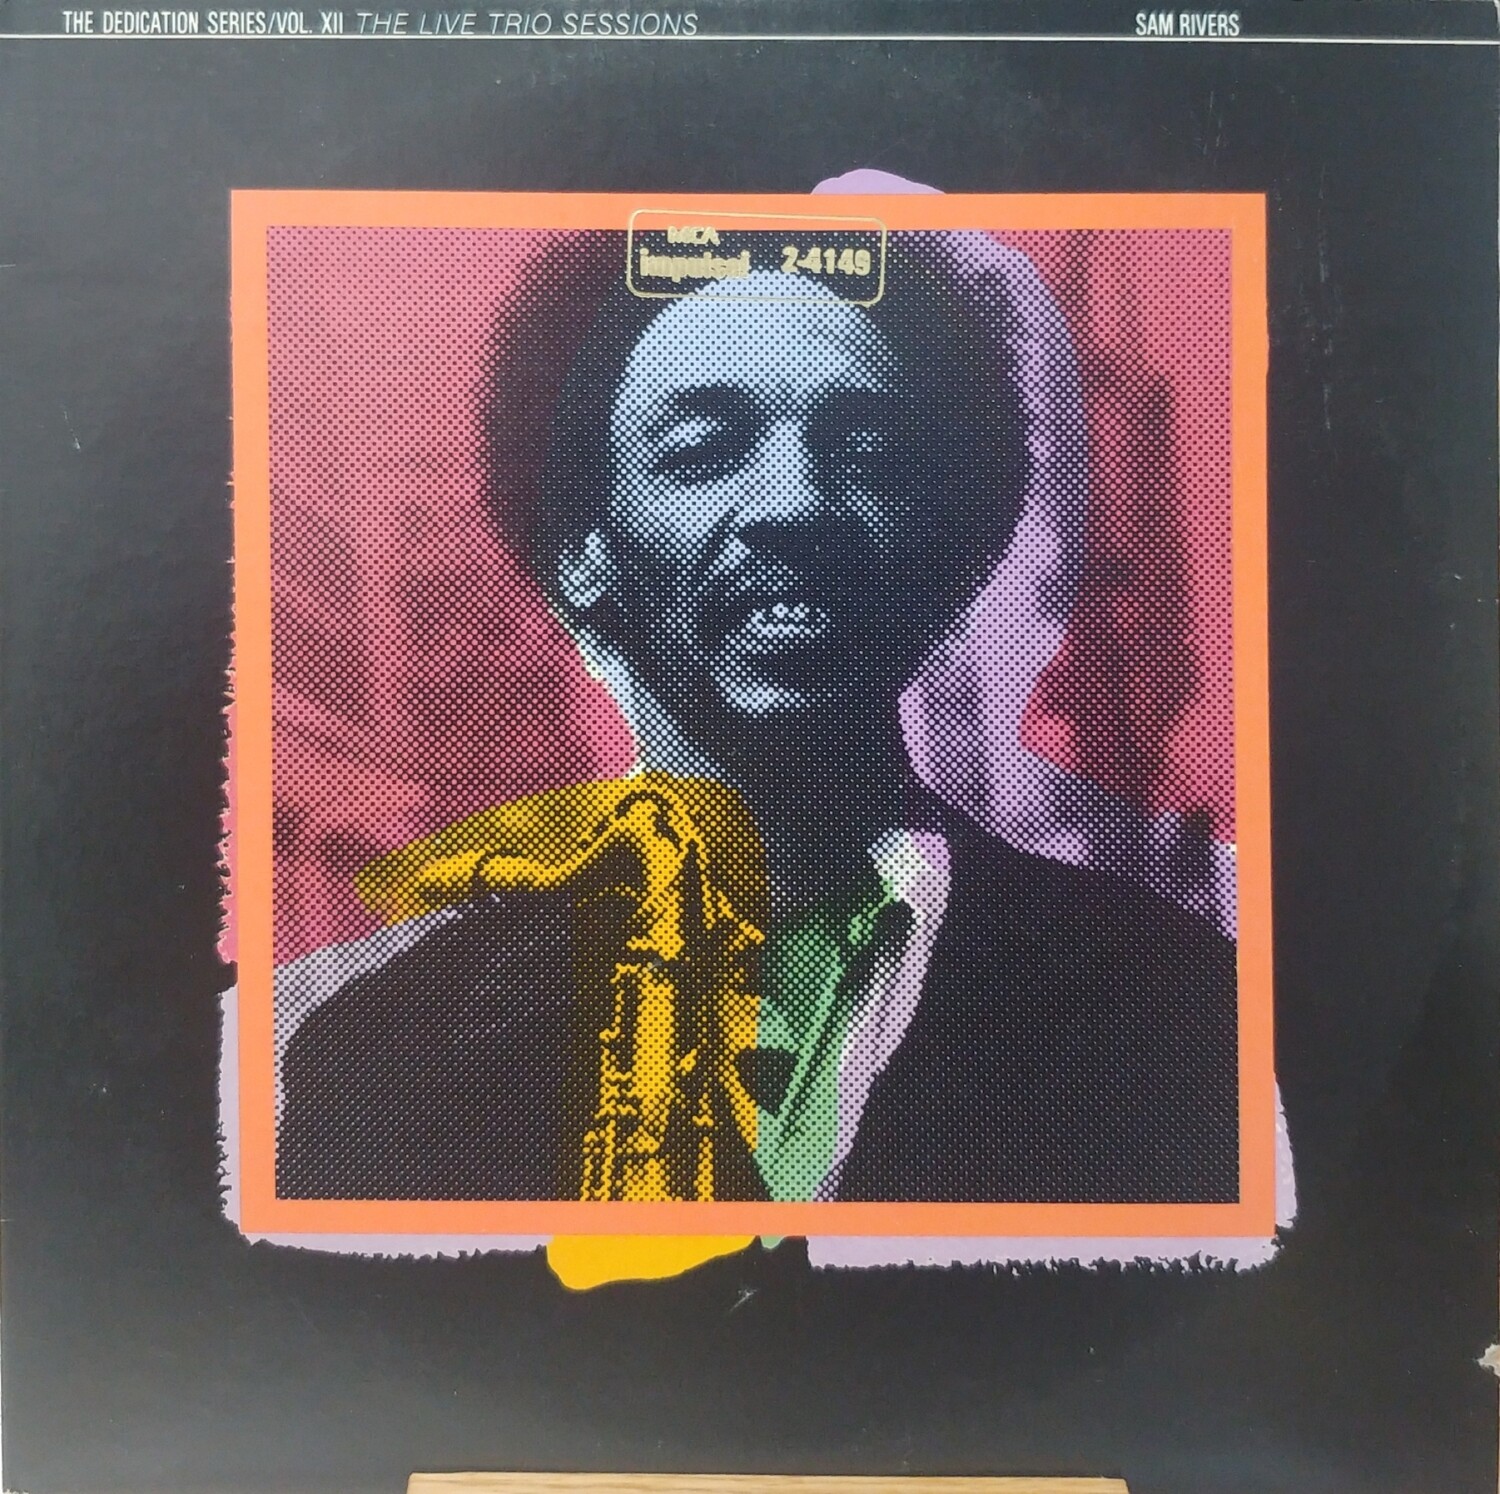 Sam Rivers - The Dedication series vol.XII, The Live Trio Sessions